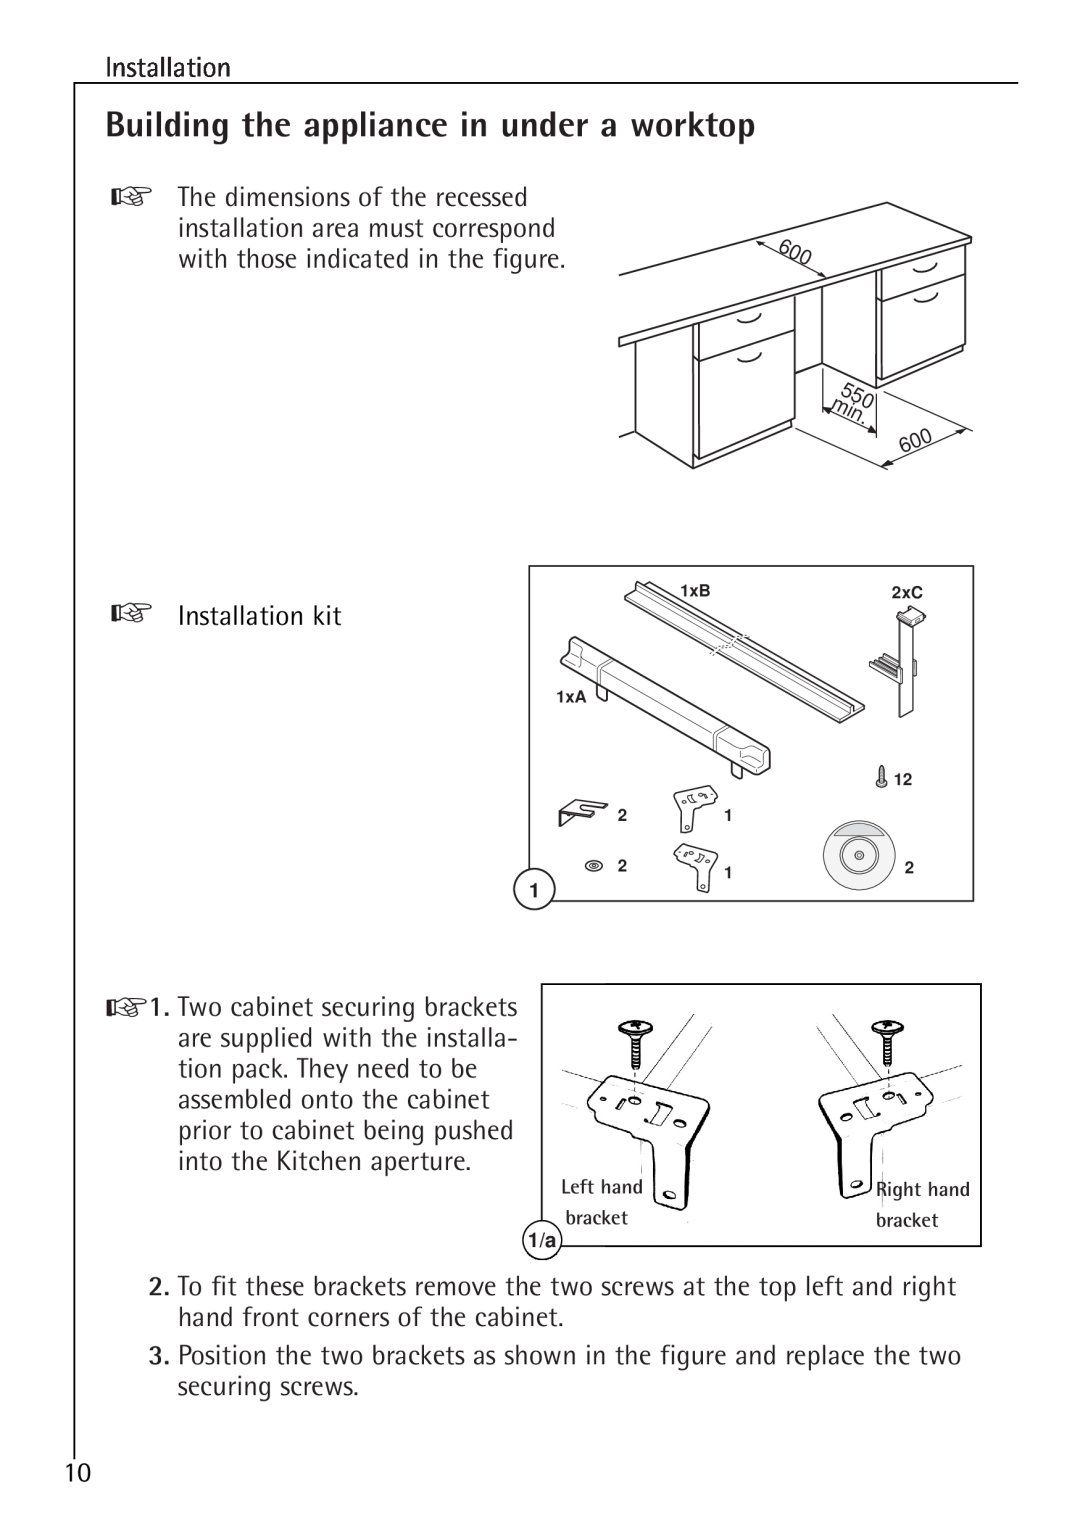 Electrolux 86000 i installation instructions Building the appliance in under a worktop, 550 min 